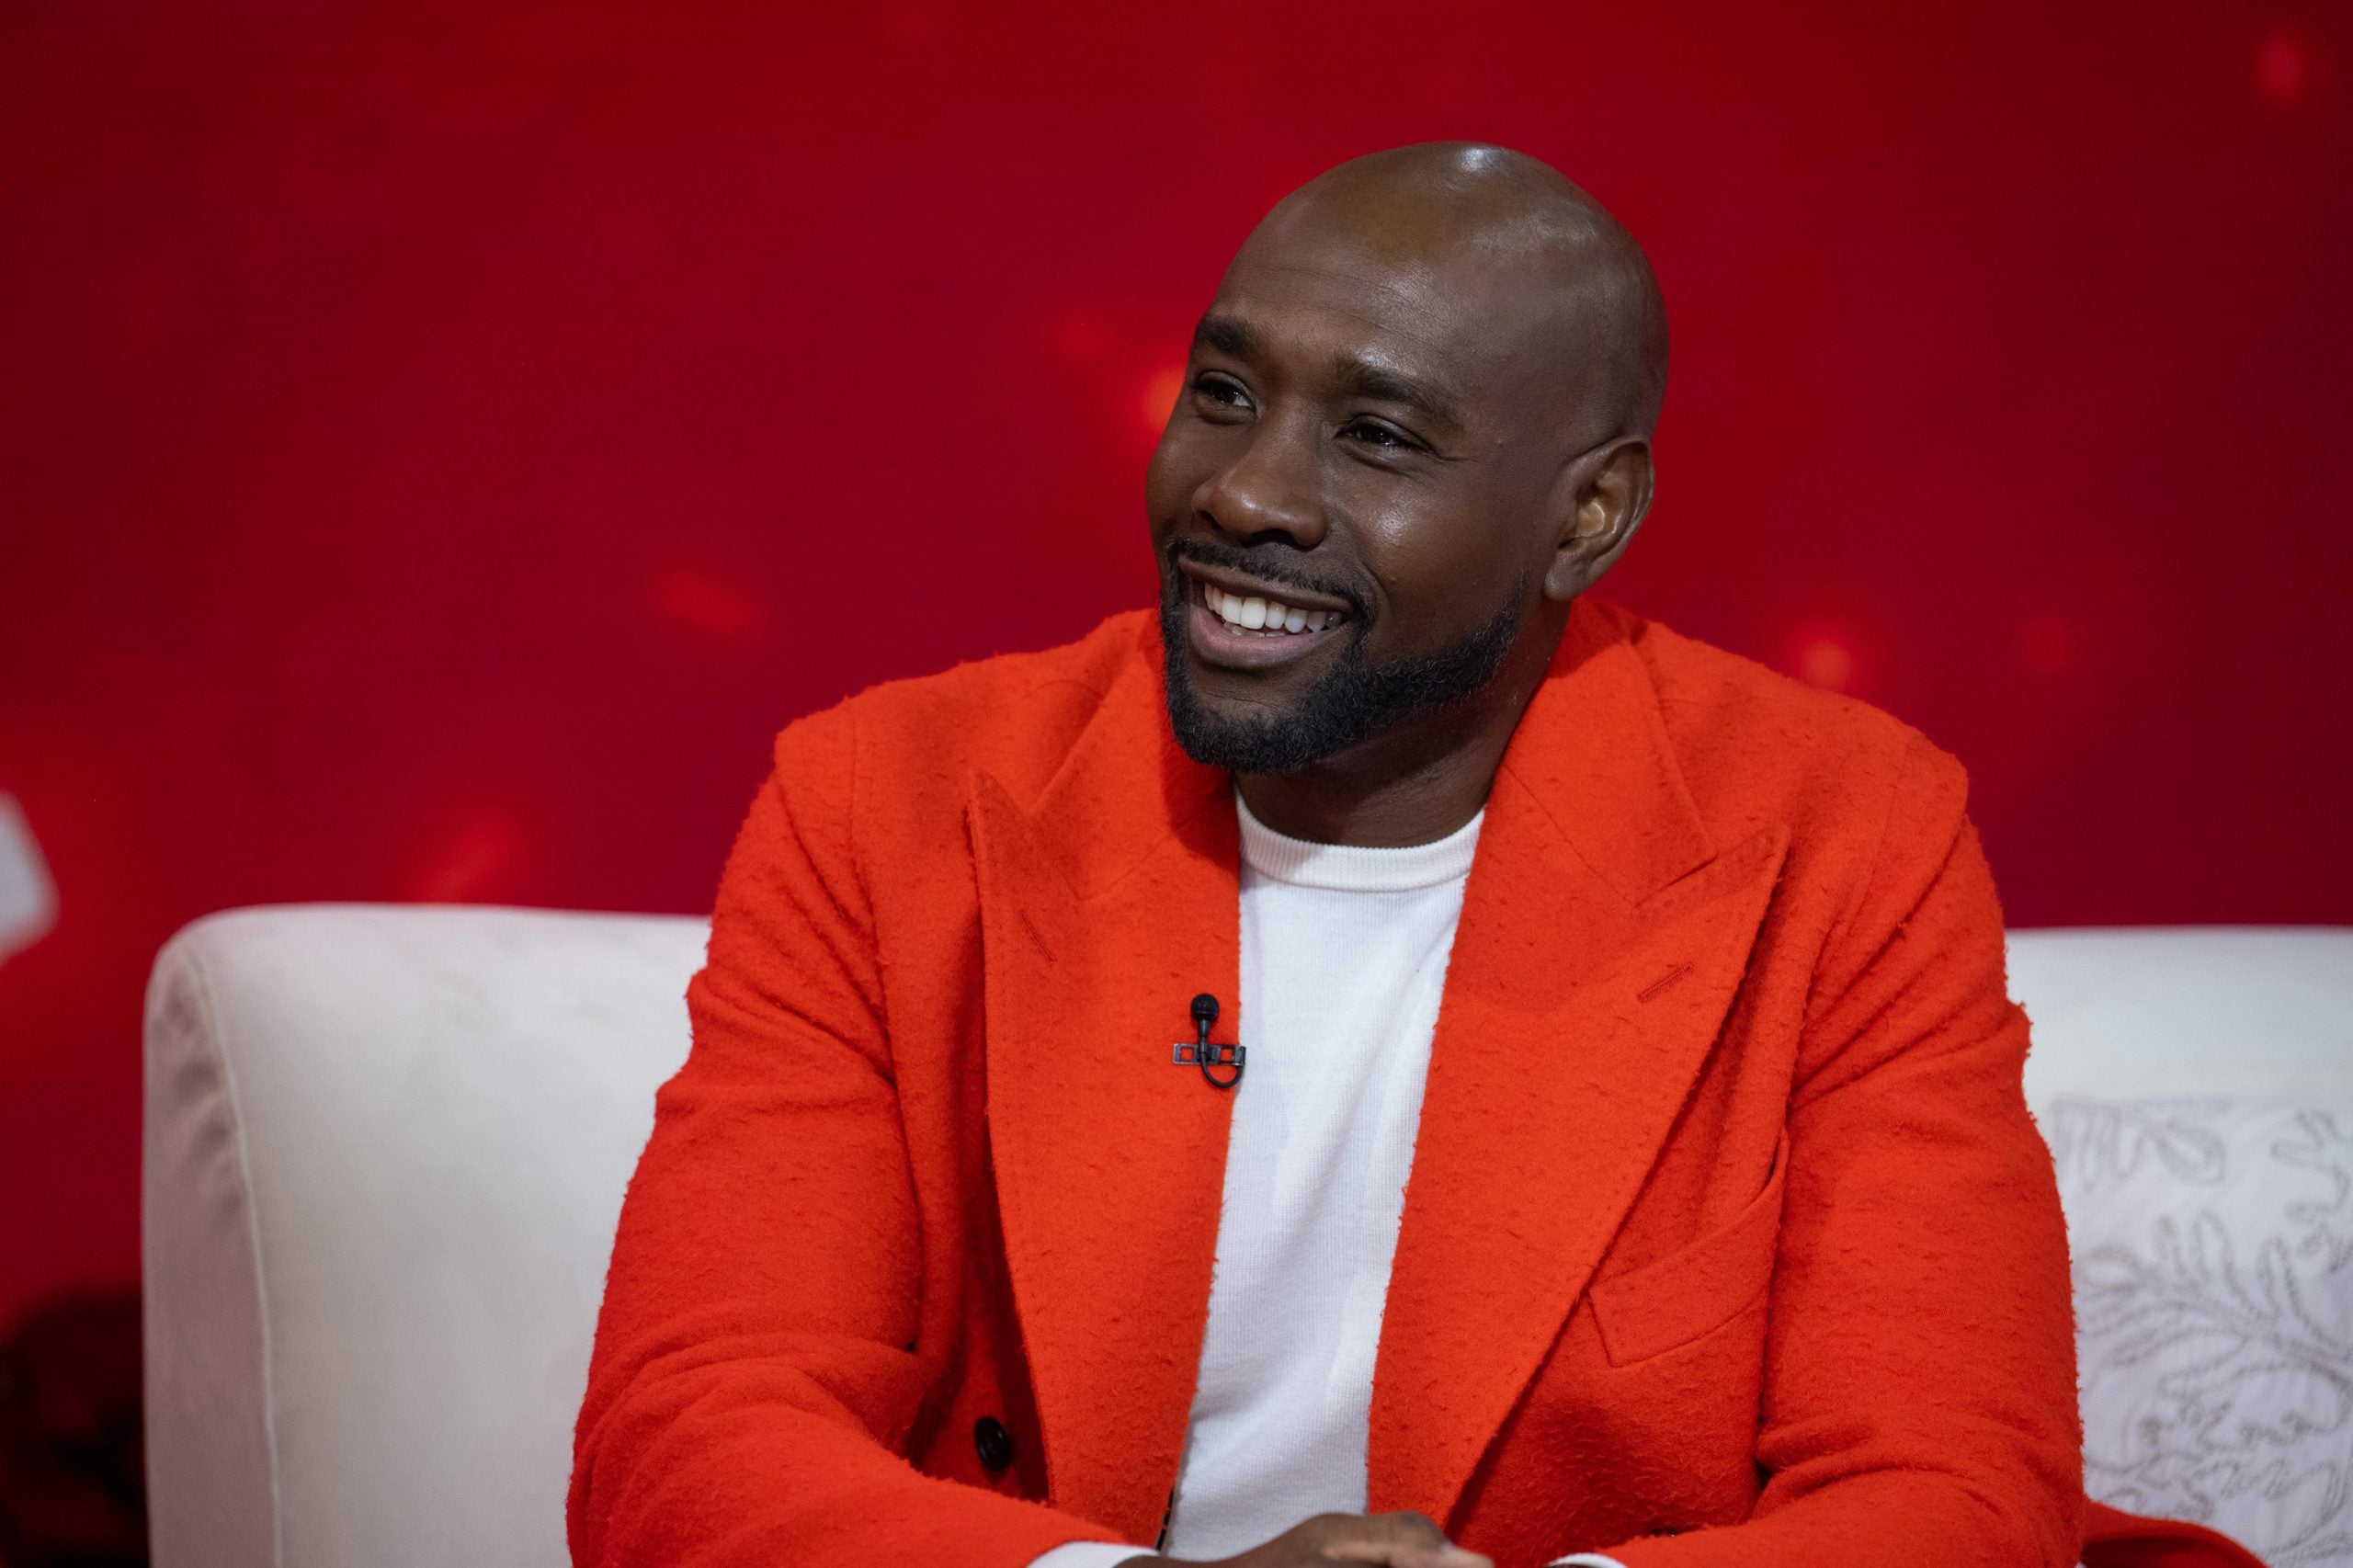 Morris Chestnut Is Producing A Series About Restoring The Legacy Of Tulsa Massacre Survivors